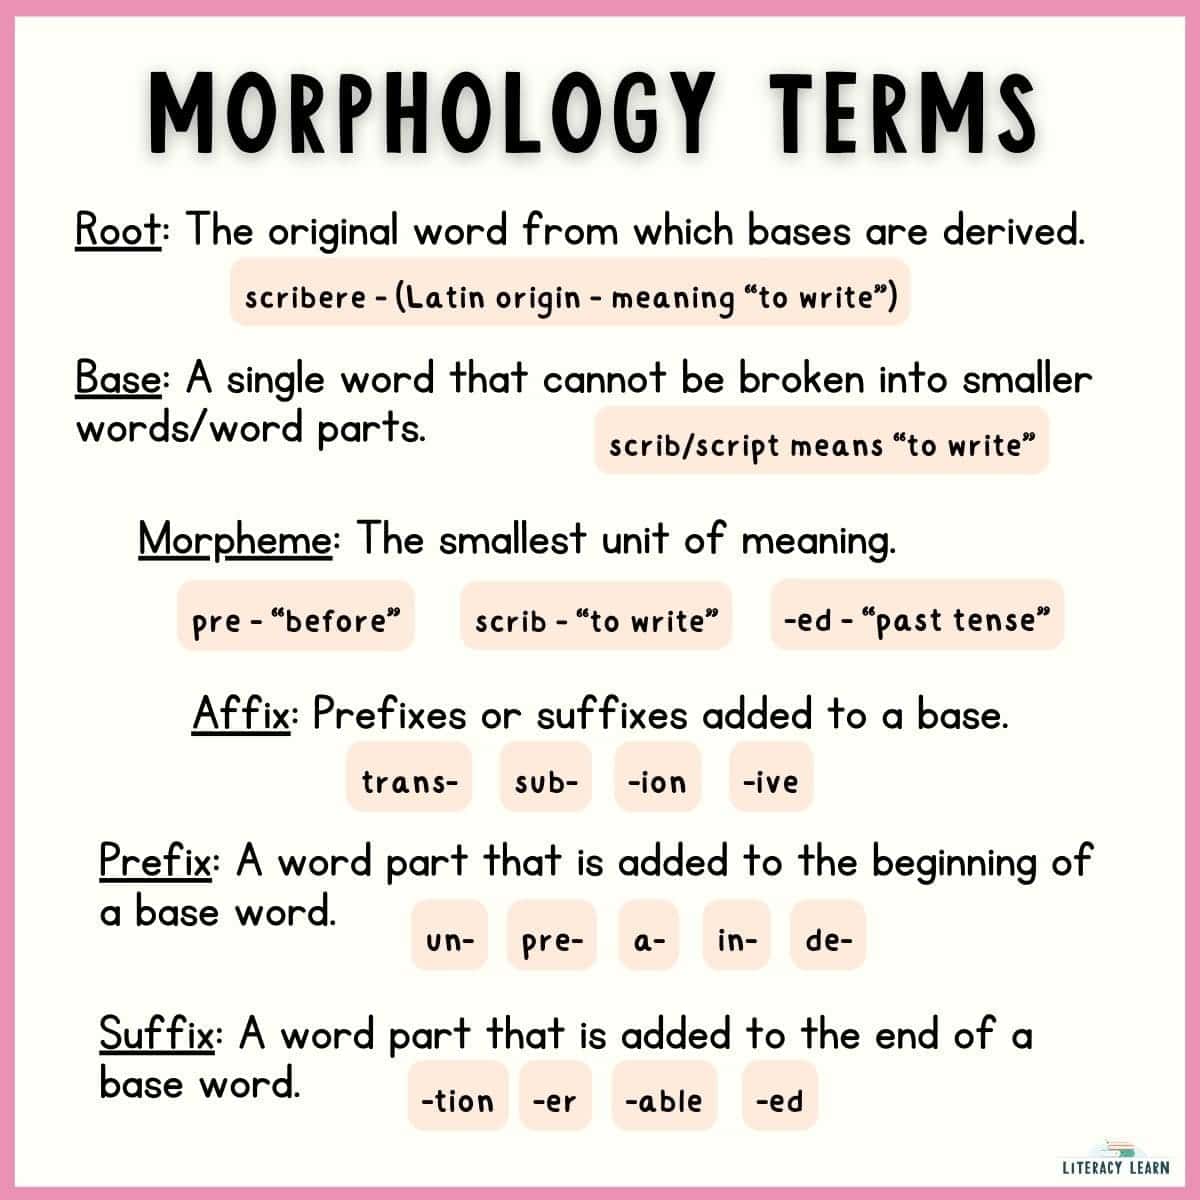 Graphic entitled "Morphology Terms" with keywords, definitions, and examples.